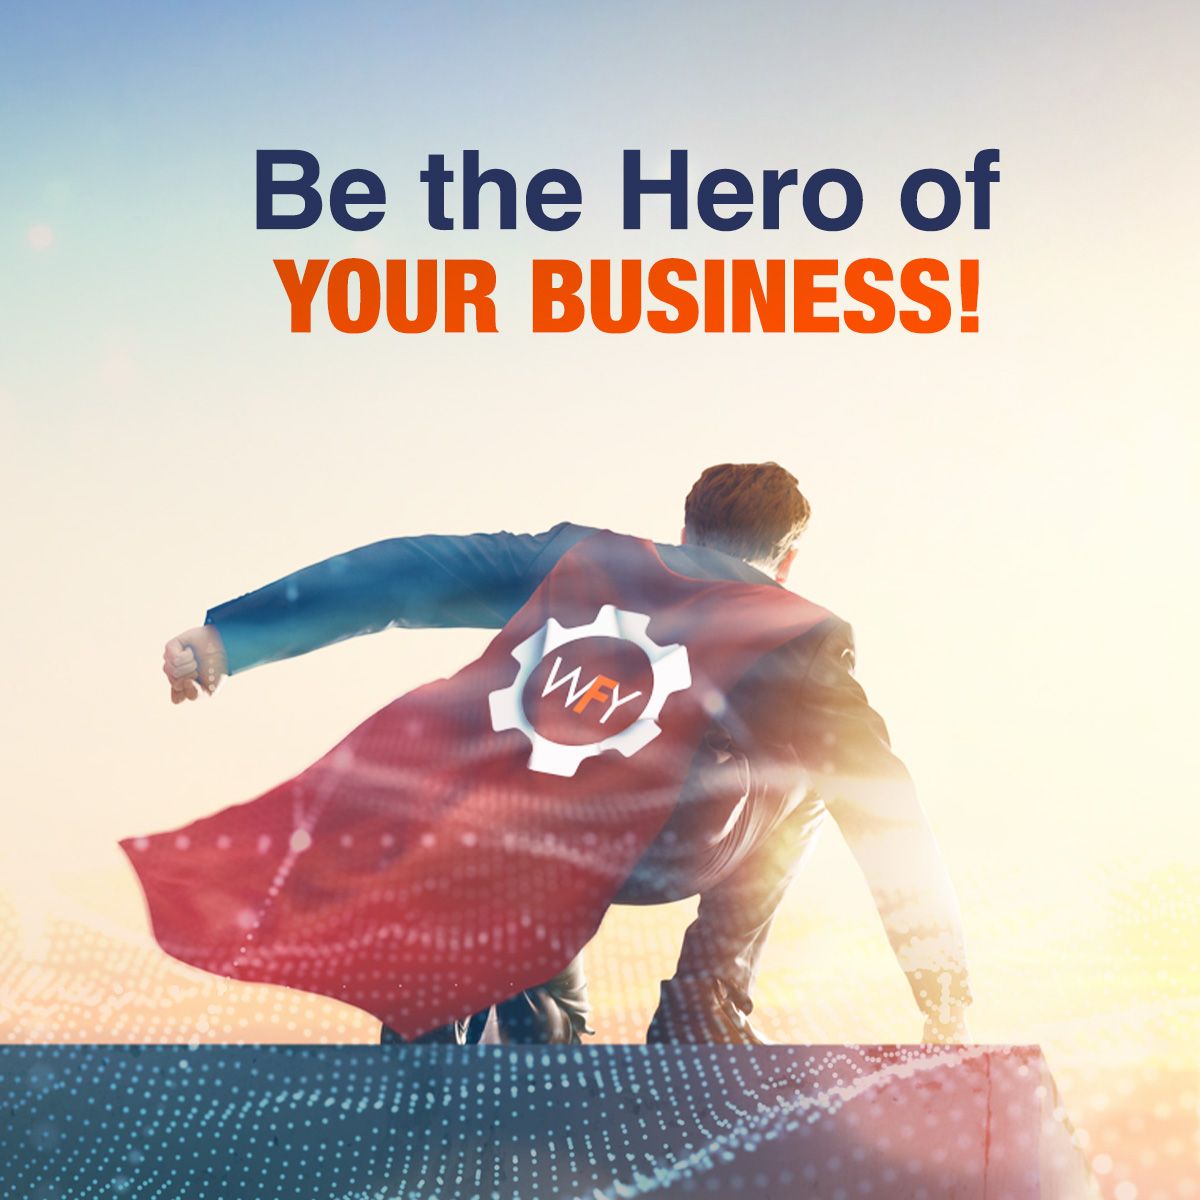 Be the Hero of Your Business!